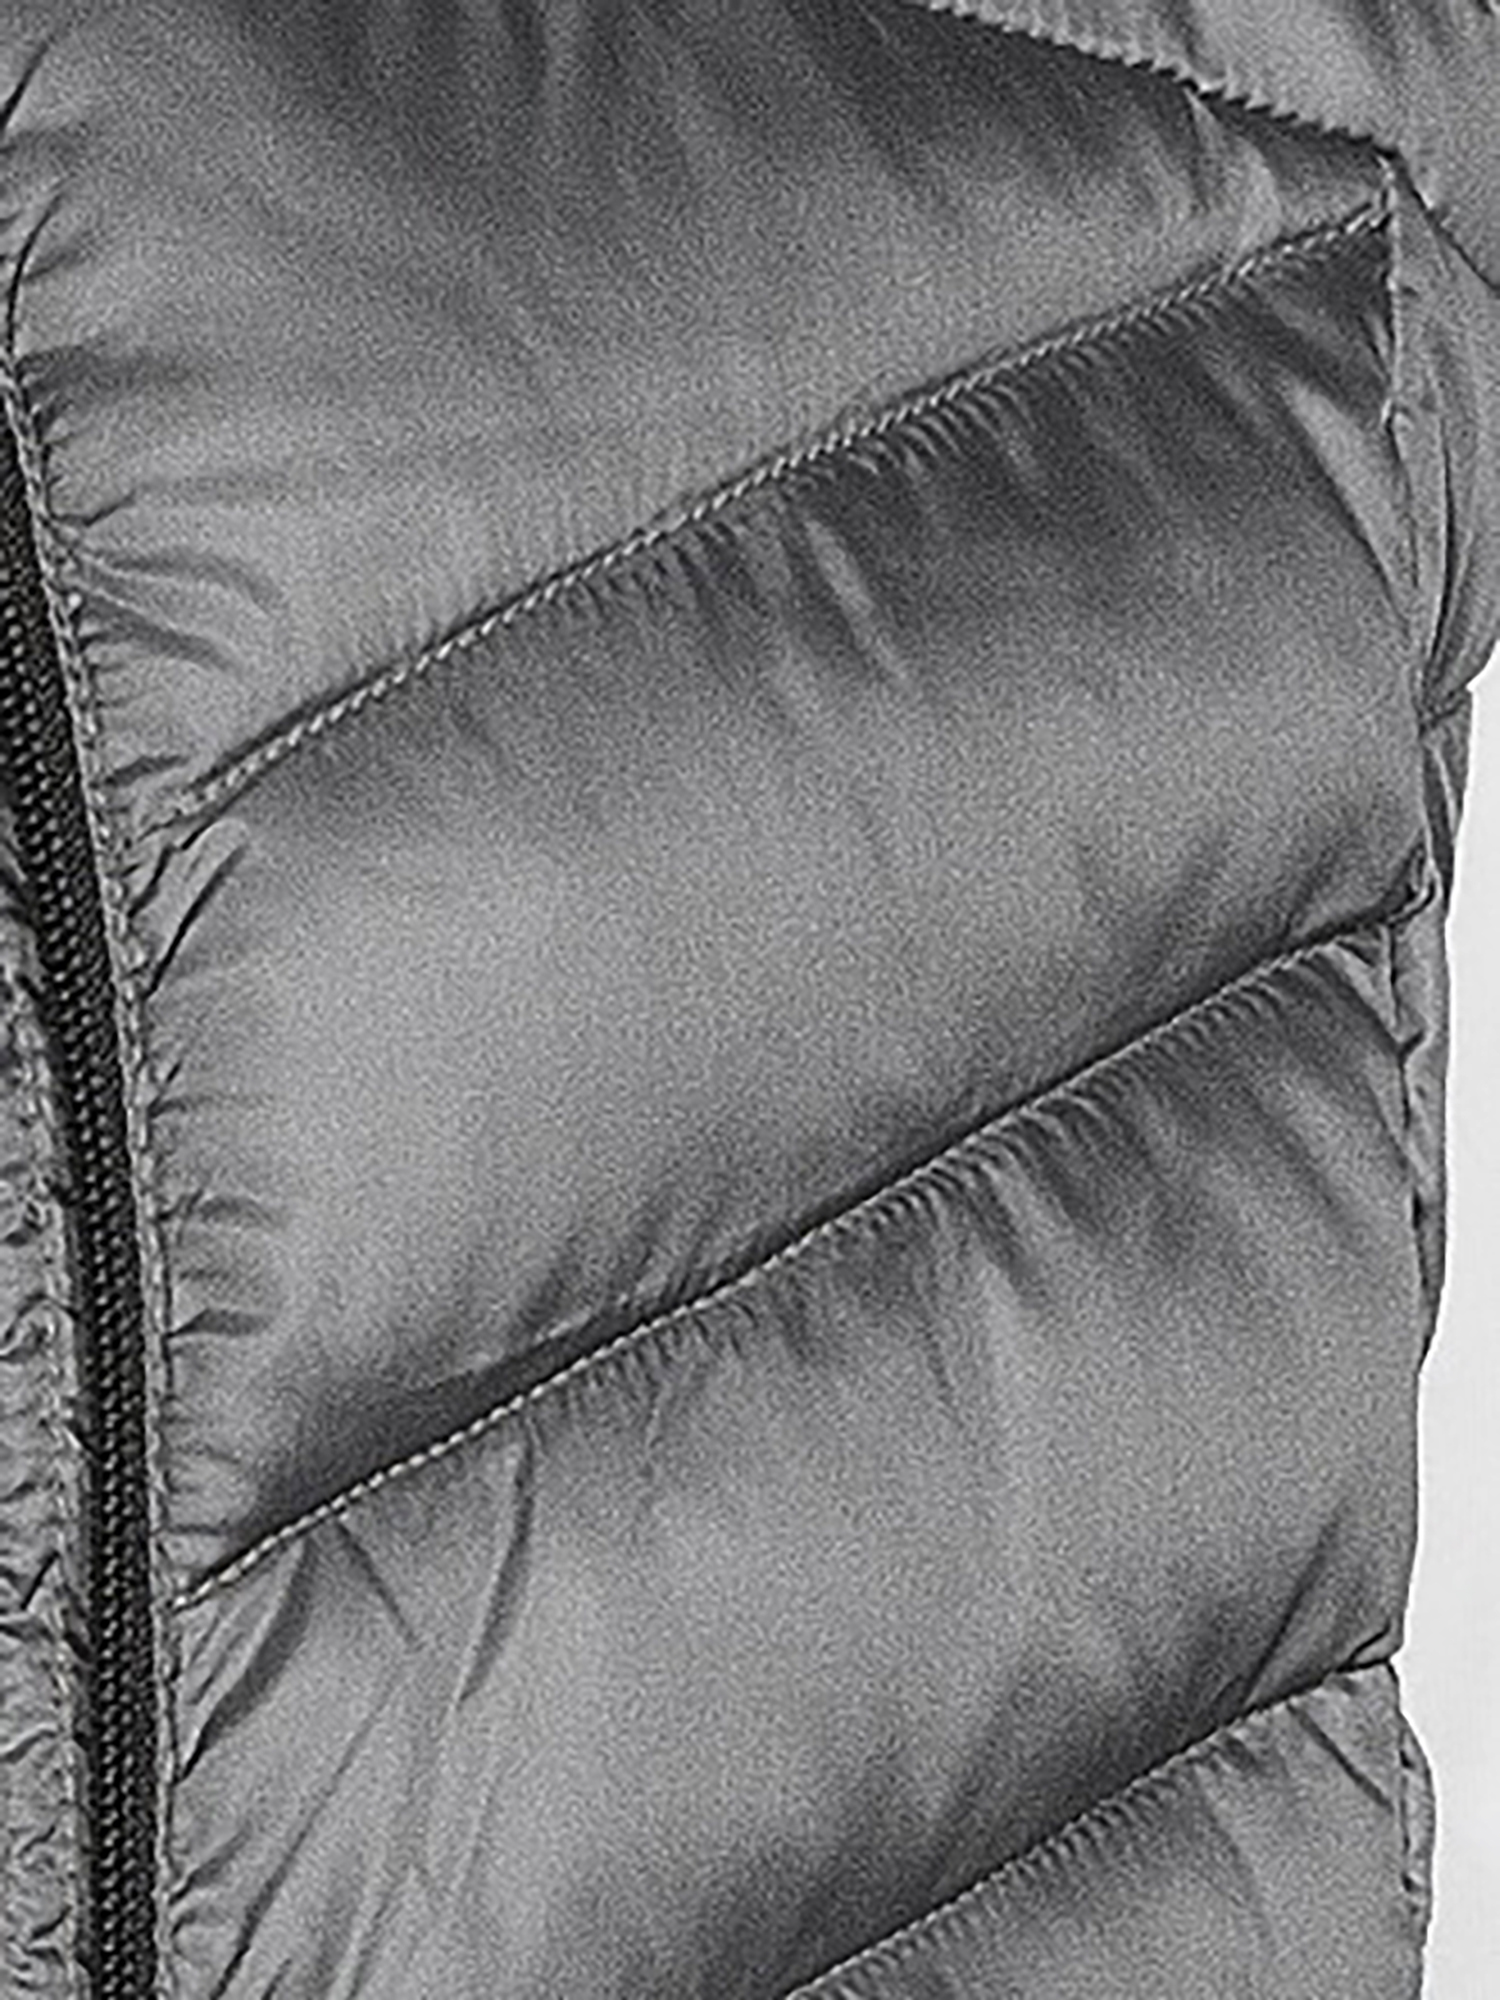 Big Chill Women's Chevron Quilted Puffer Vest - image 4 of 5